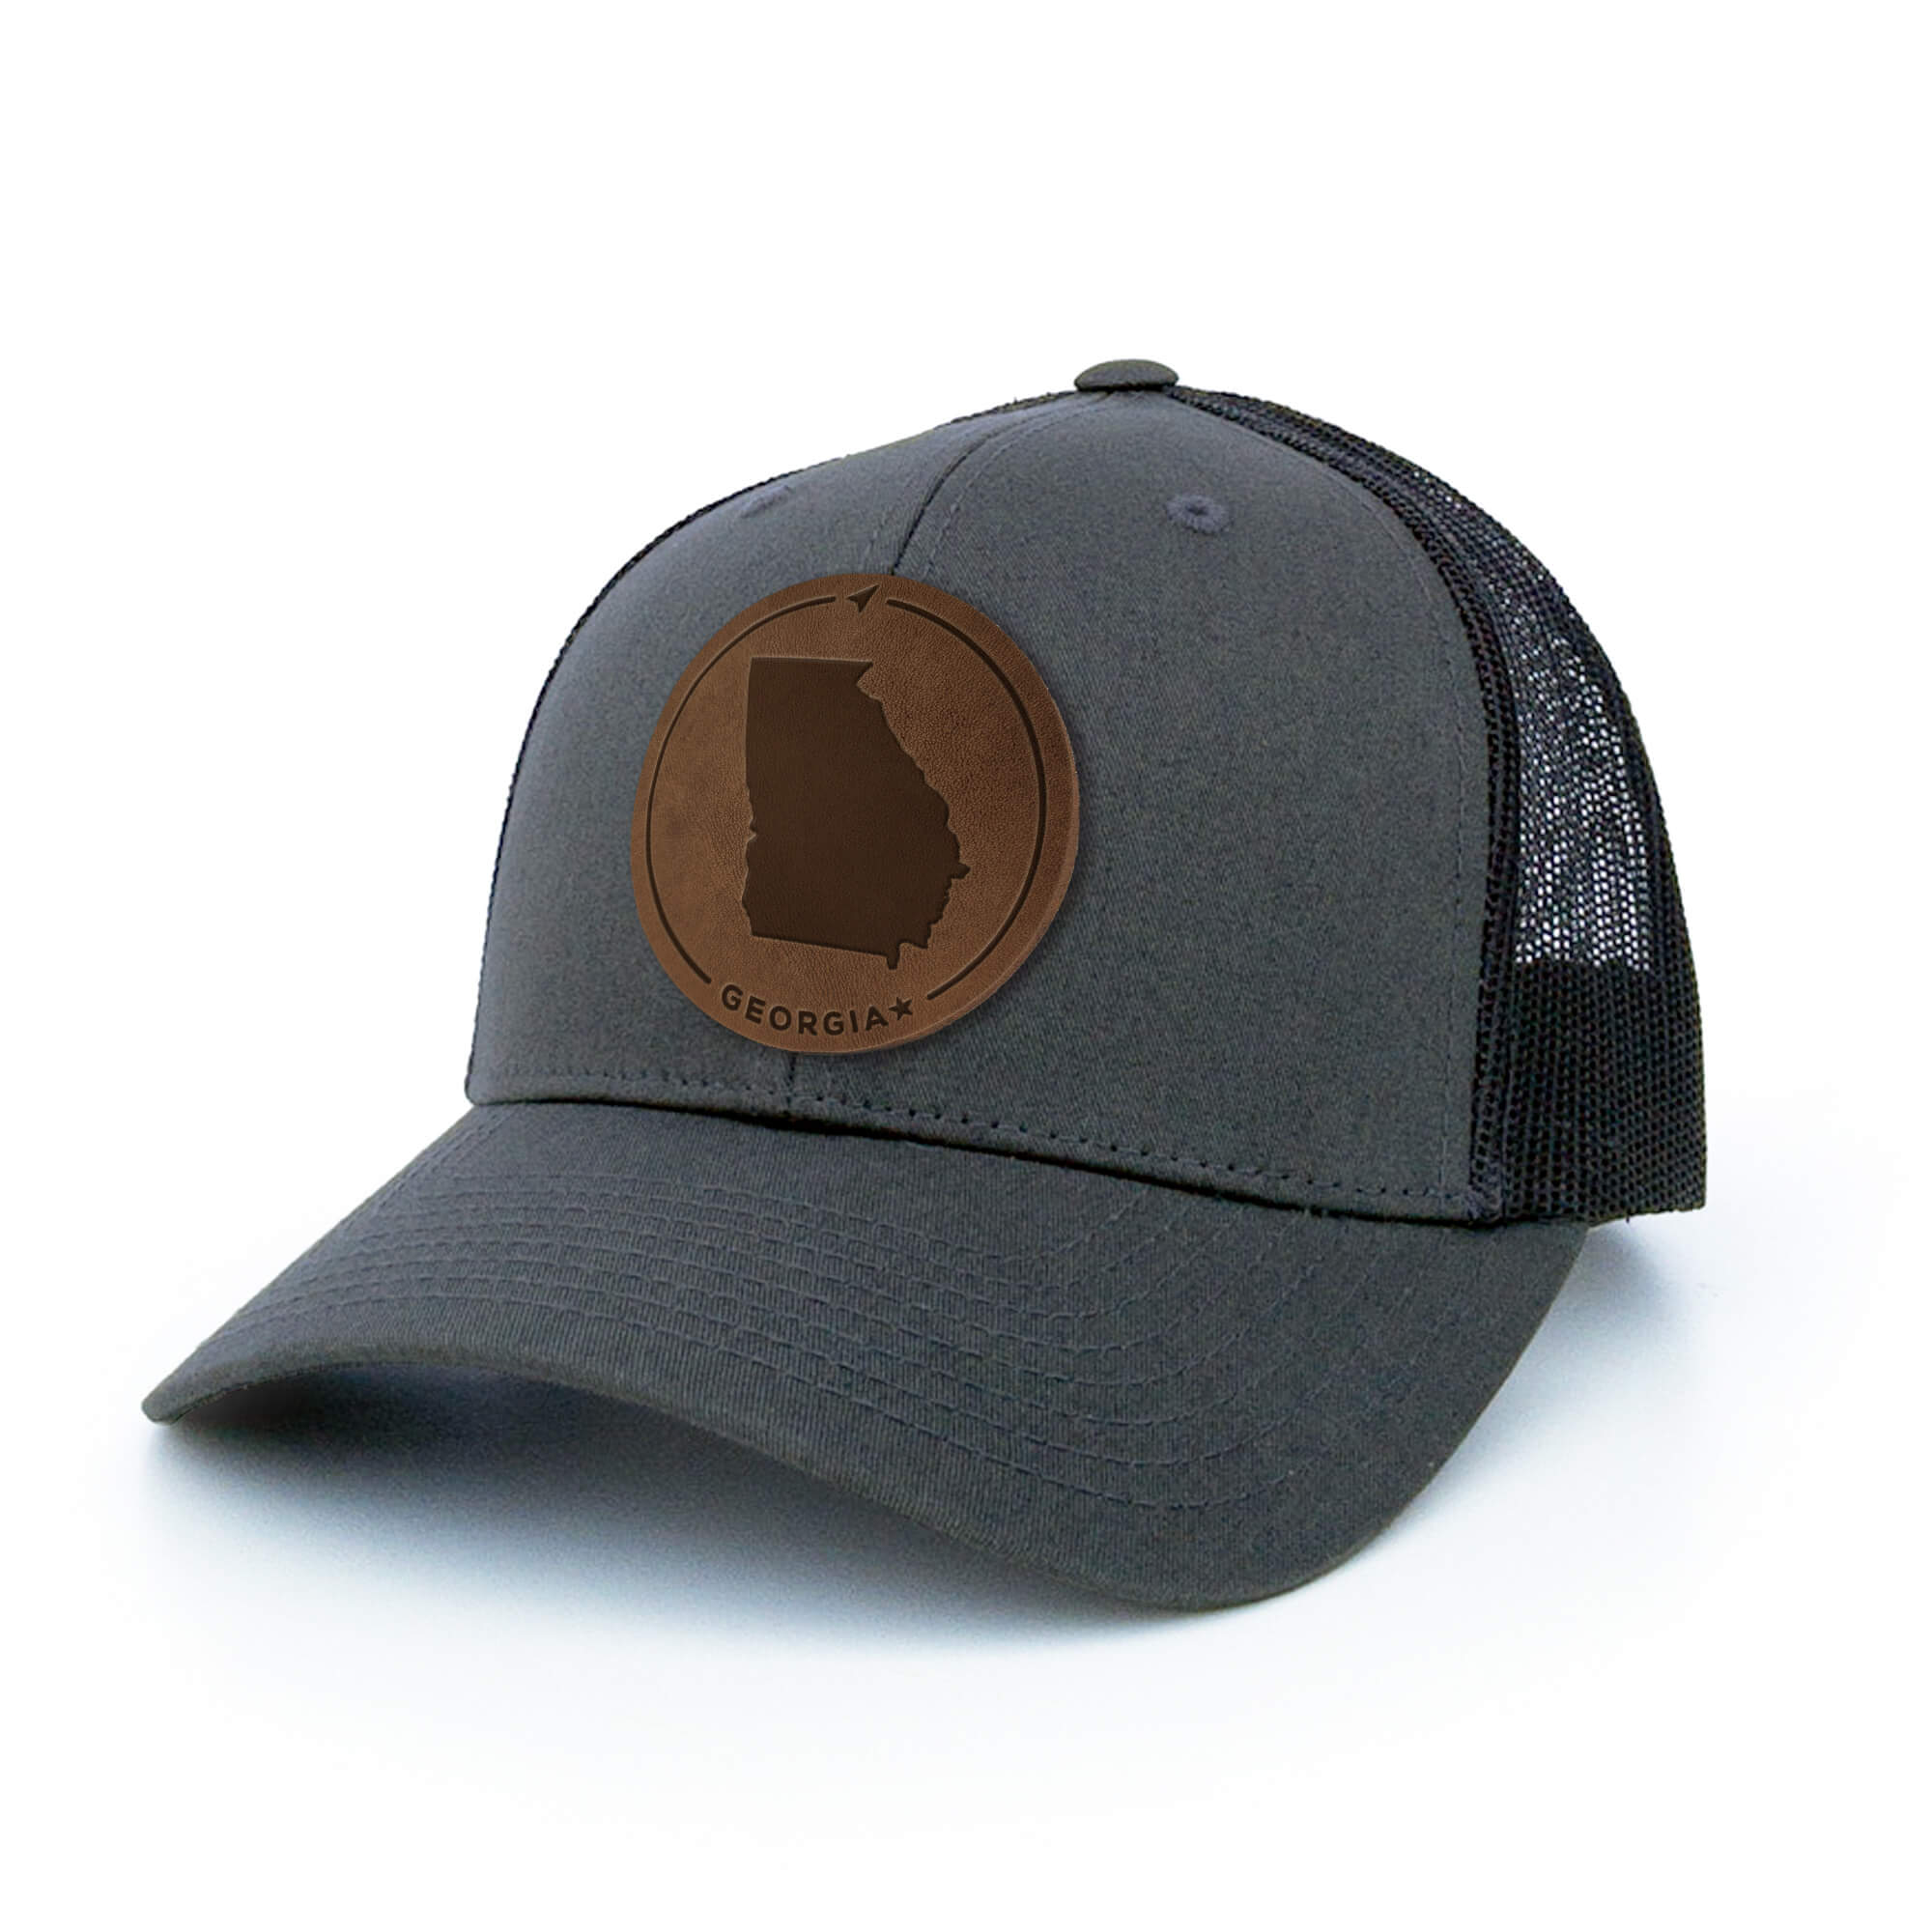 Charcoal trucker hat with full-grain leather patch of Georgia | BLACK-003-009, CHARC-003-009, NAVY-003-009, HGREY-003-009, MOSS-003-009, BROWN-003-009